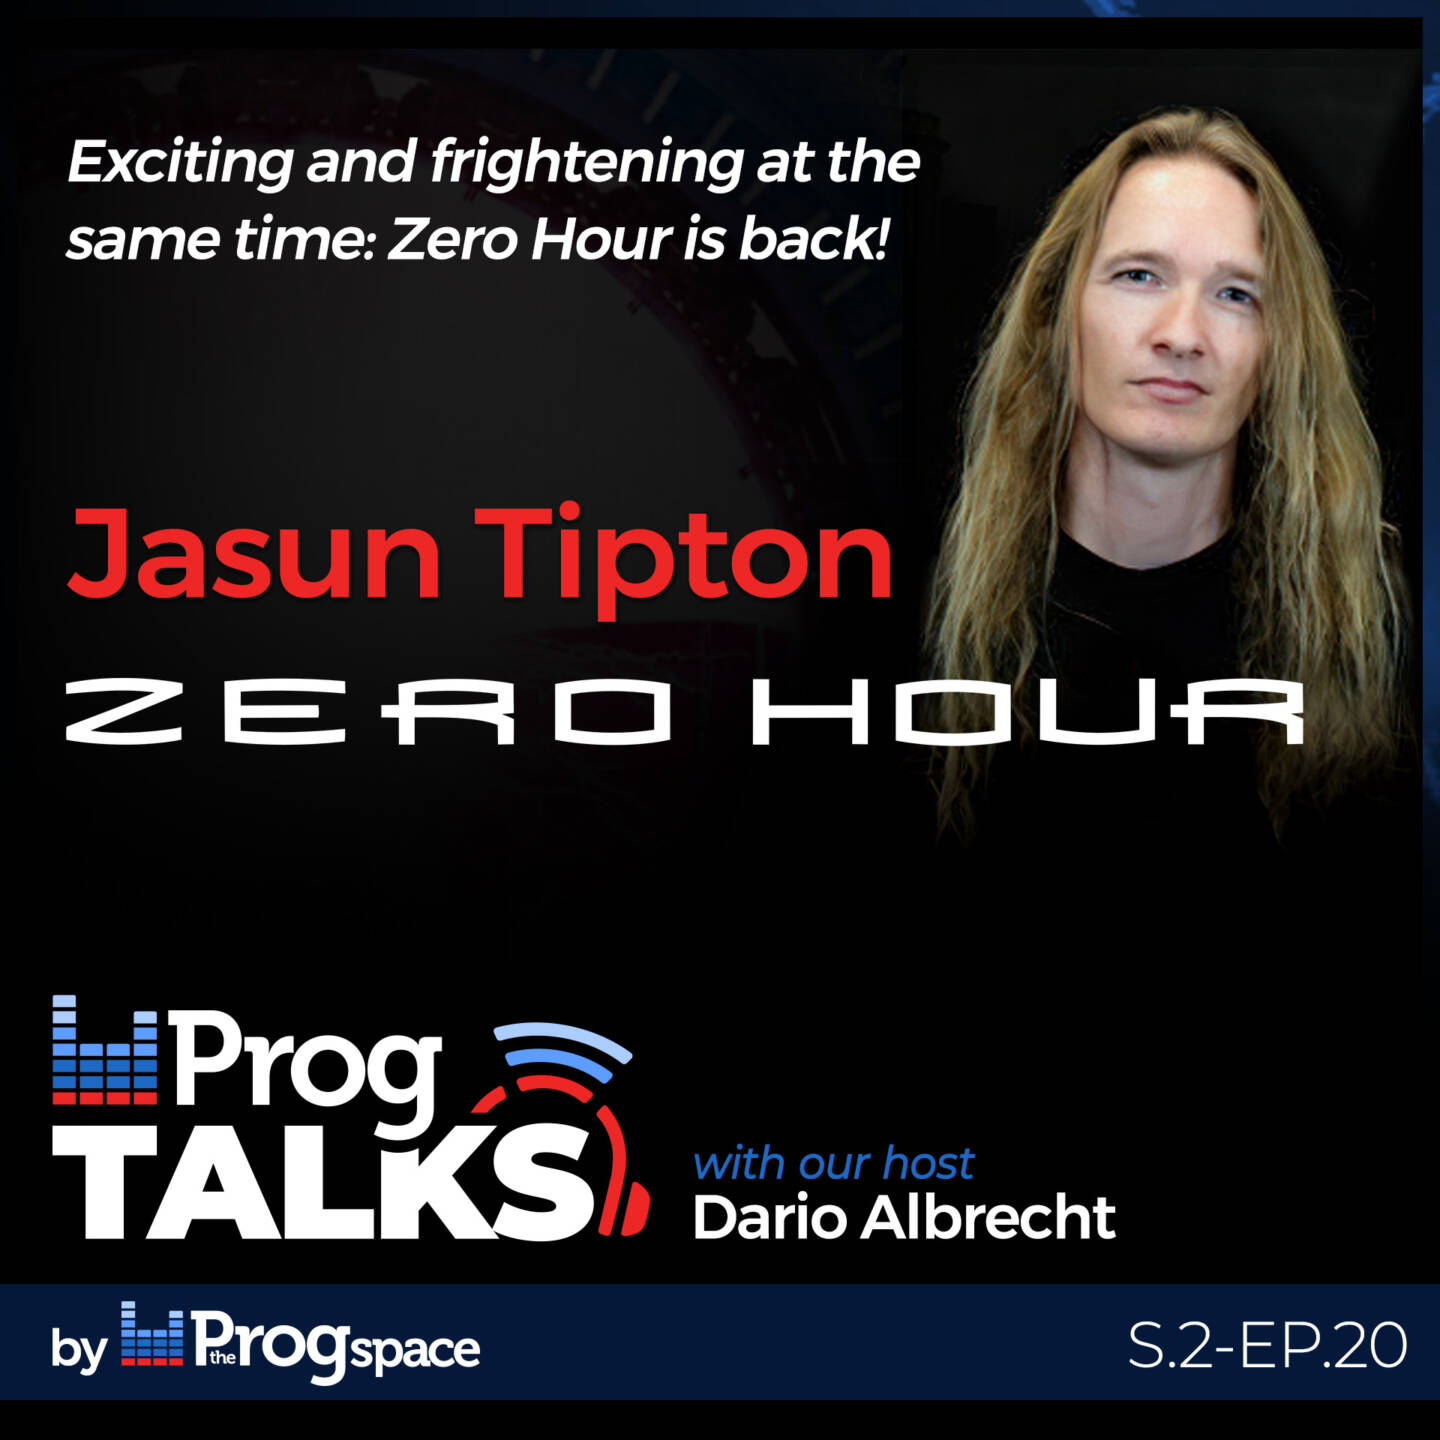 Exciting and frightening at the same time: Zero Hour is back!